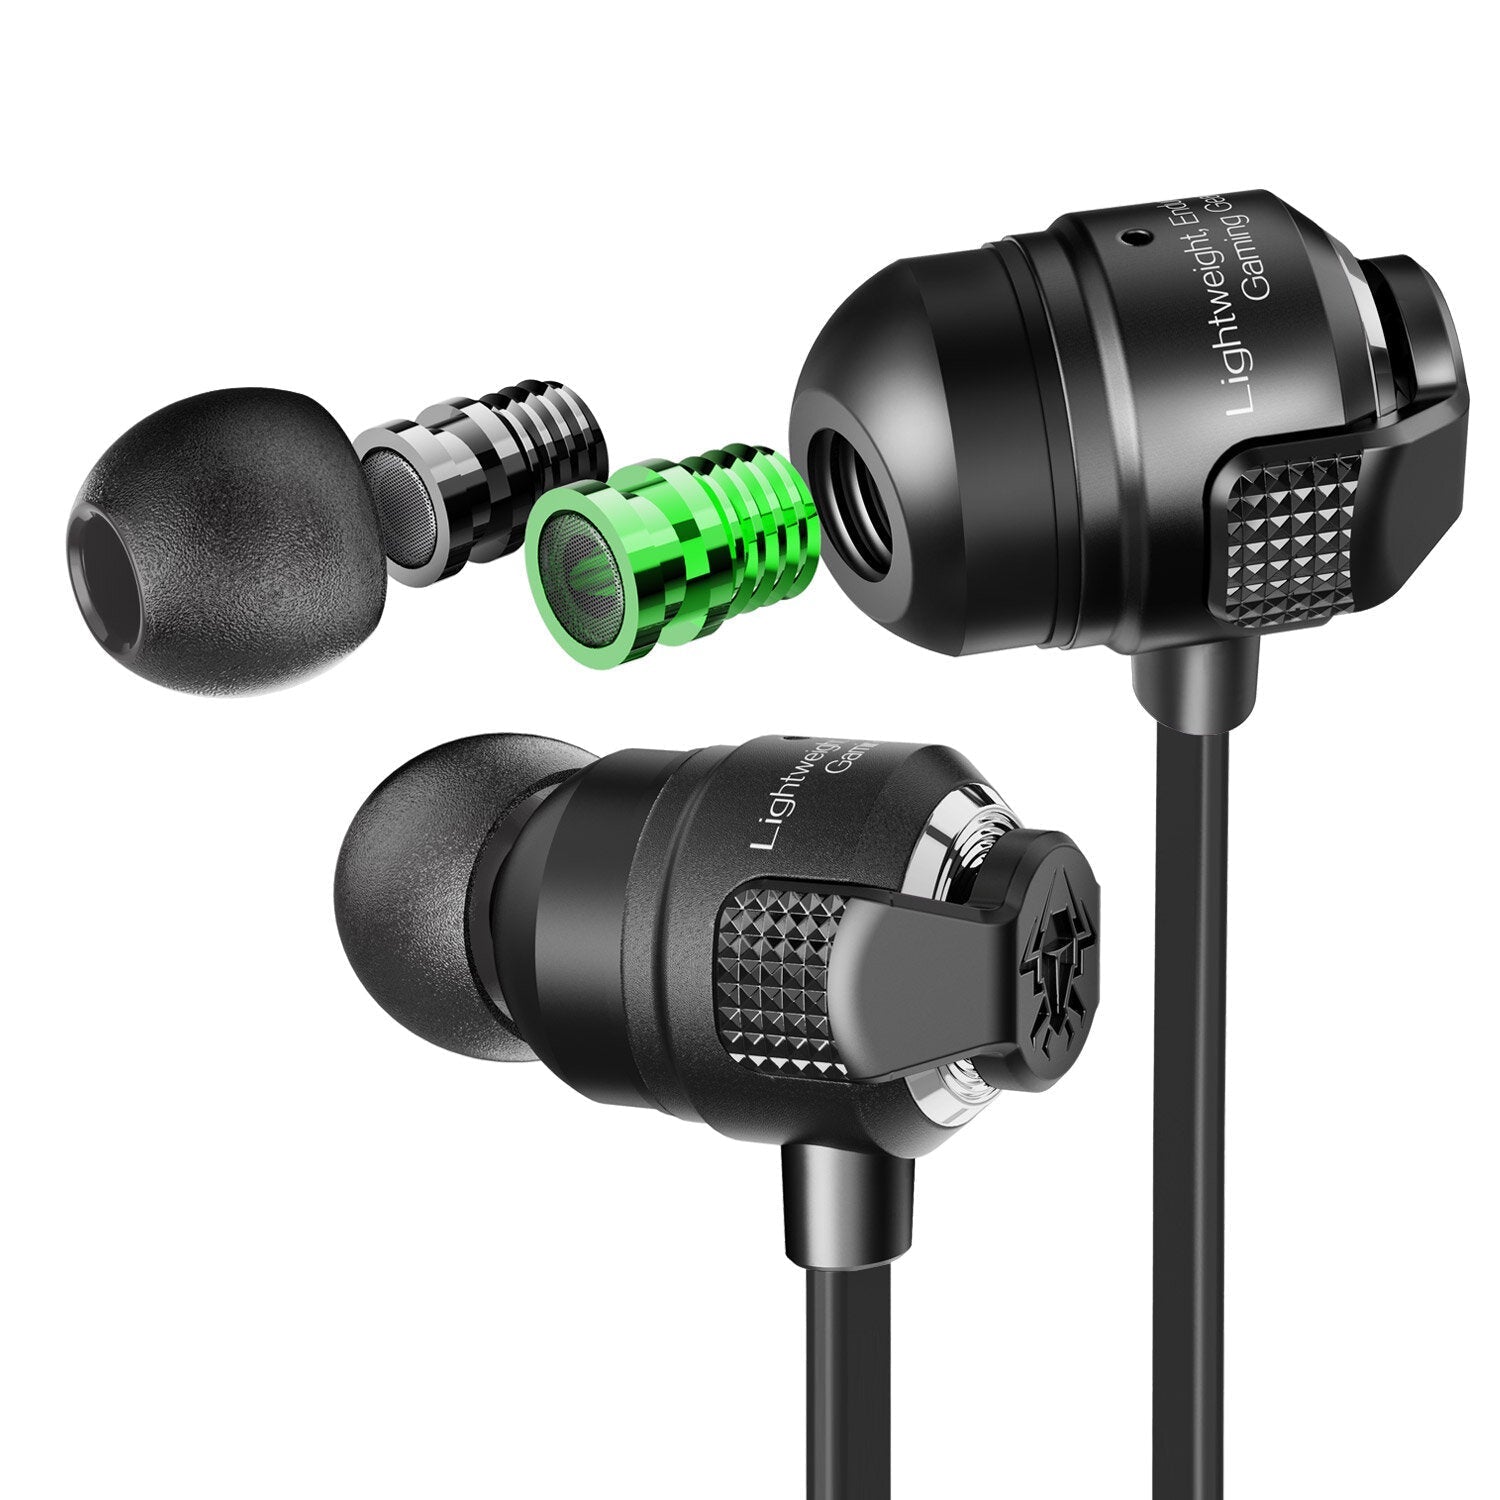 Airburst Super Bass Dual Variable Sound Cell HD Voice Earphone Gaming Headset Earbuds Metal Filters